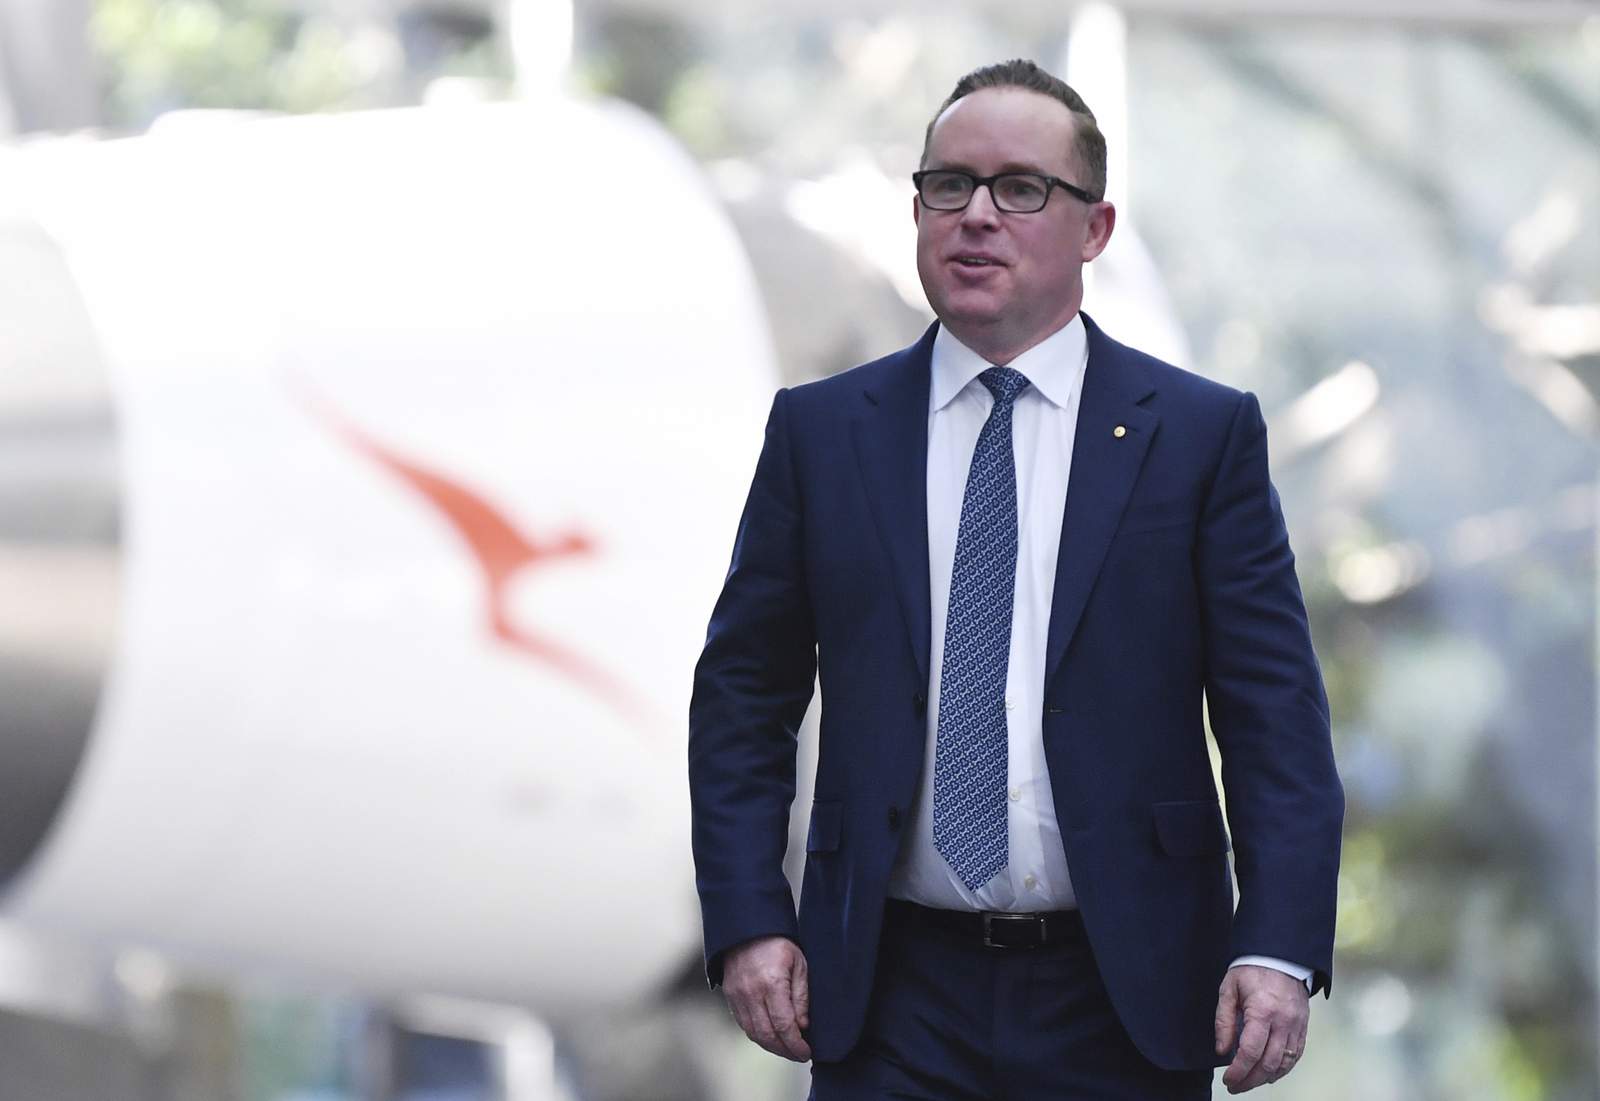 Qantas expects global travel won't resume until mid-2021